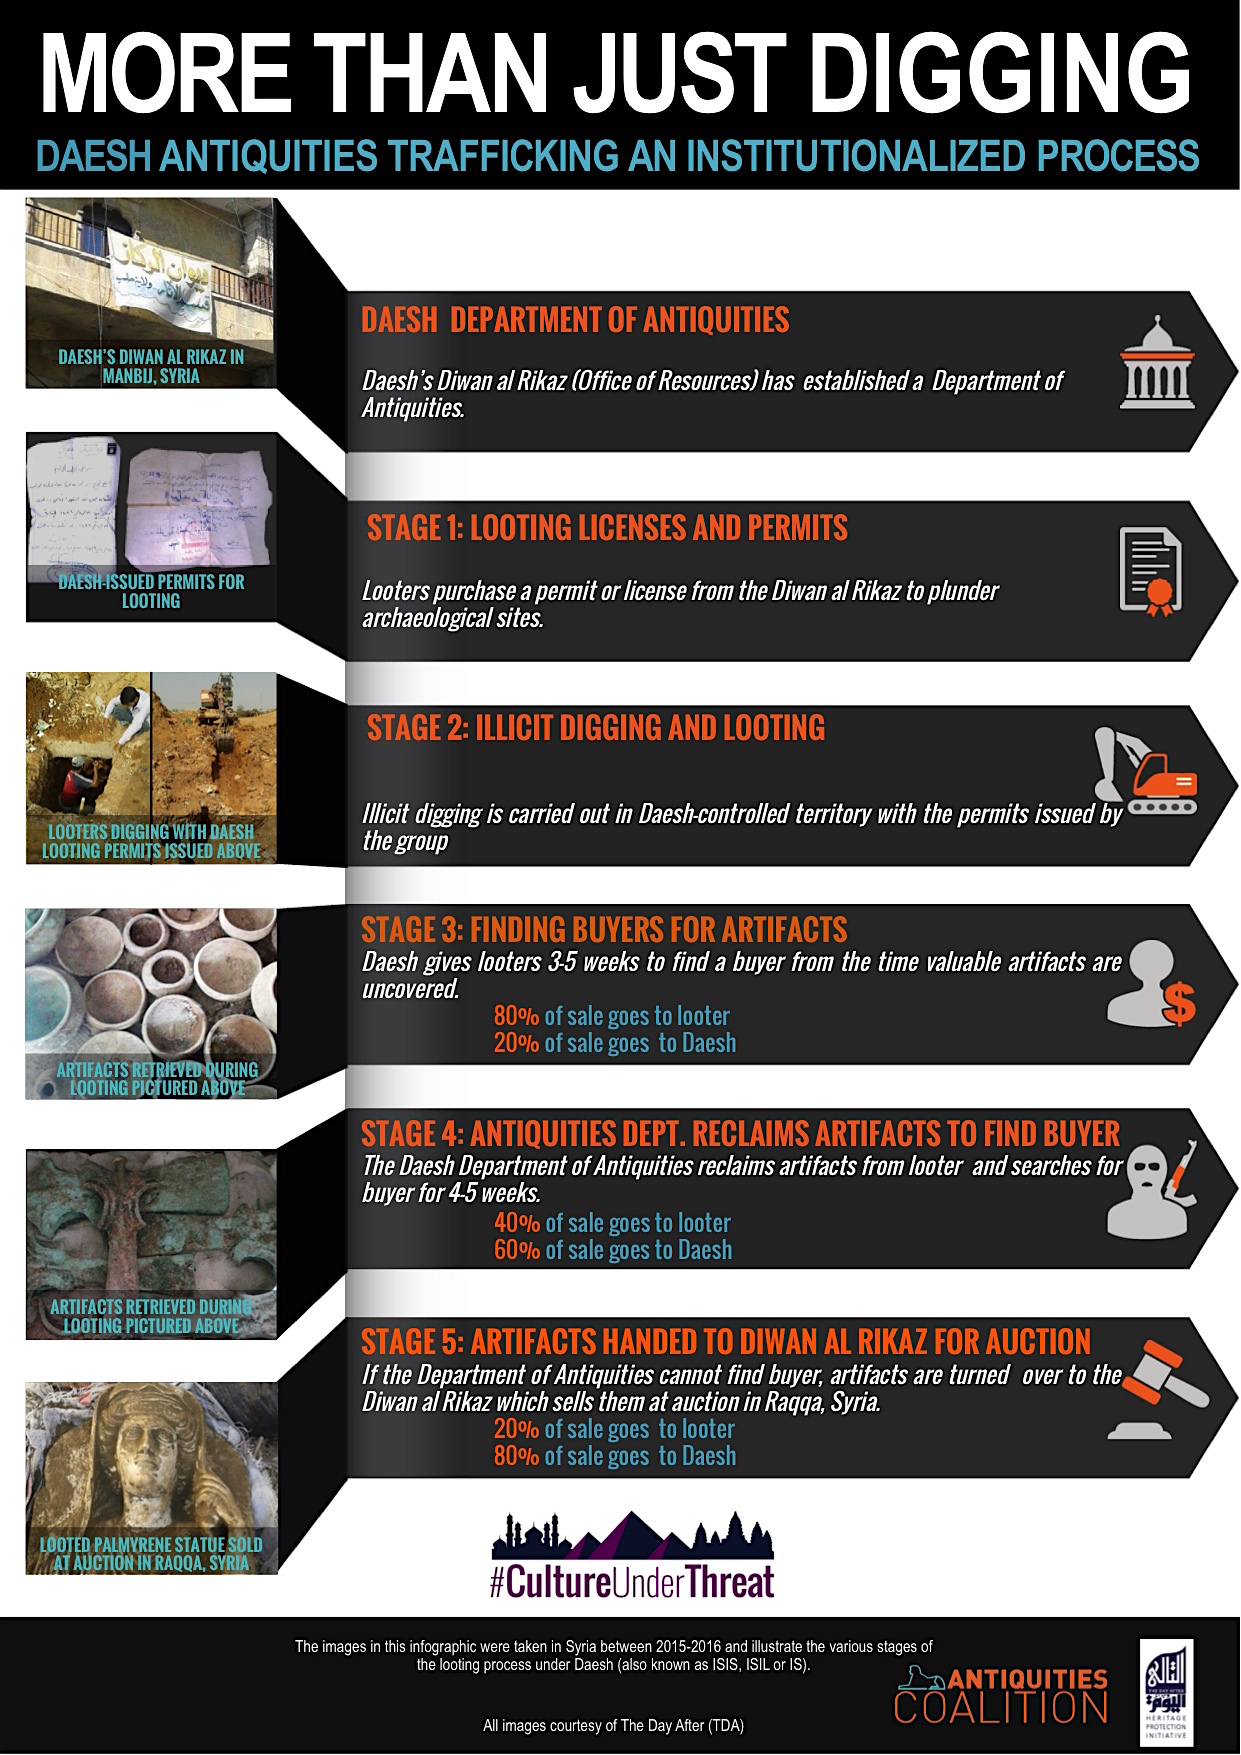 More than Just Digging: Daesh Antiquities Trafficking an Institutionalized Process, infographic from The Antiquities Coalition